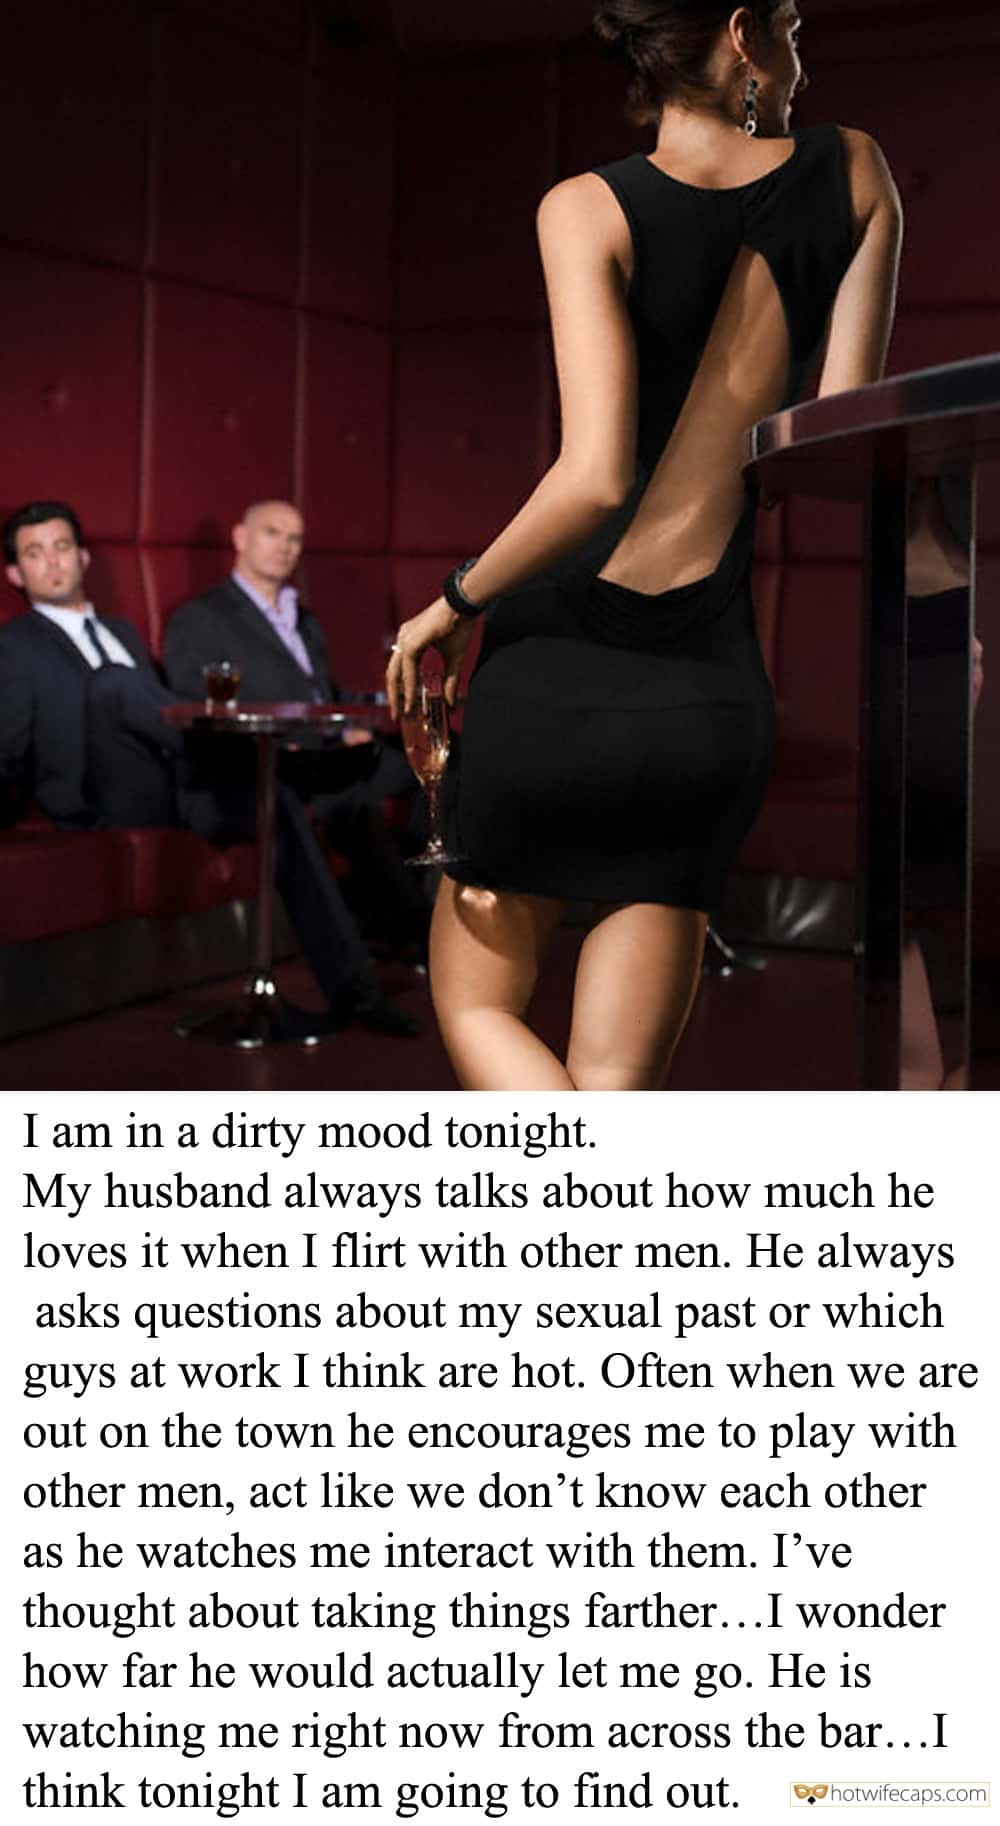 Cuckold Stories, Sexy Memes Hotwife Caption №149025 Thrill of flirting with other men in front of husband pic